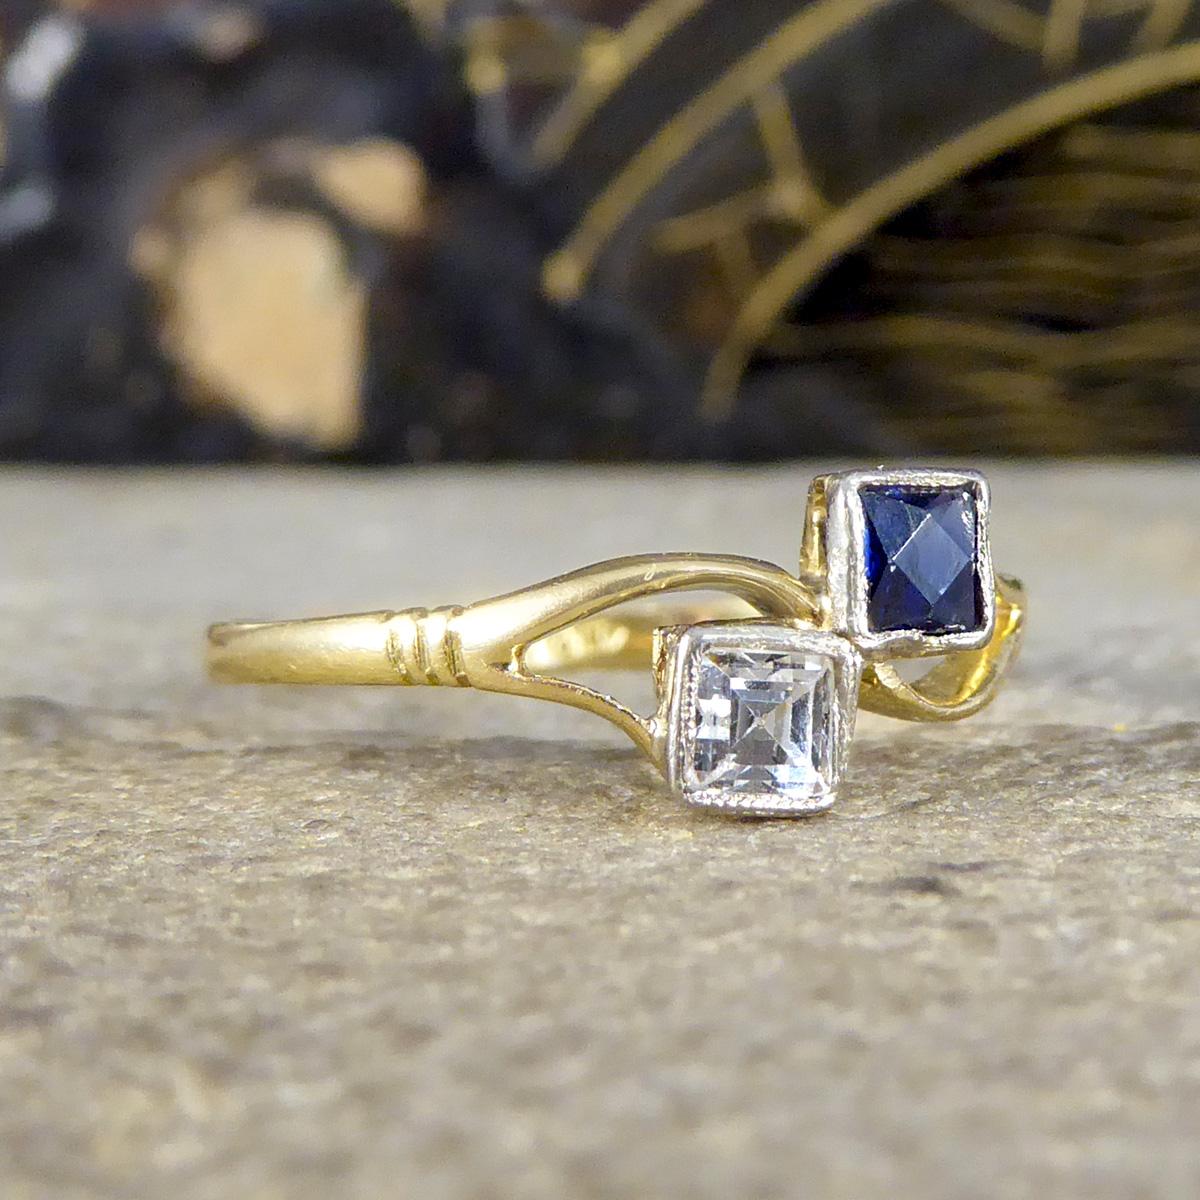 A very elegant two stone Sapphire twist ring that is set with two sparkling Sapphires of different colours. One is blue in colour and the other is colourless weighing a total of 0.42ct. The stones are set in a bezel settings in a Toi et Moi style.